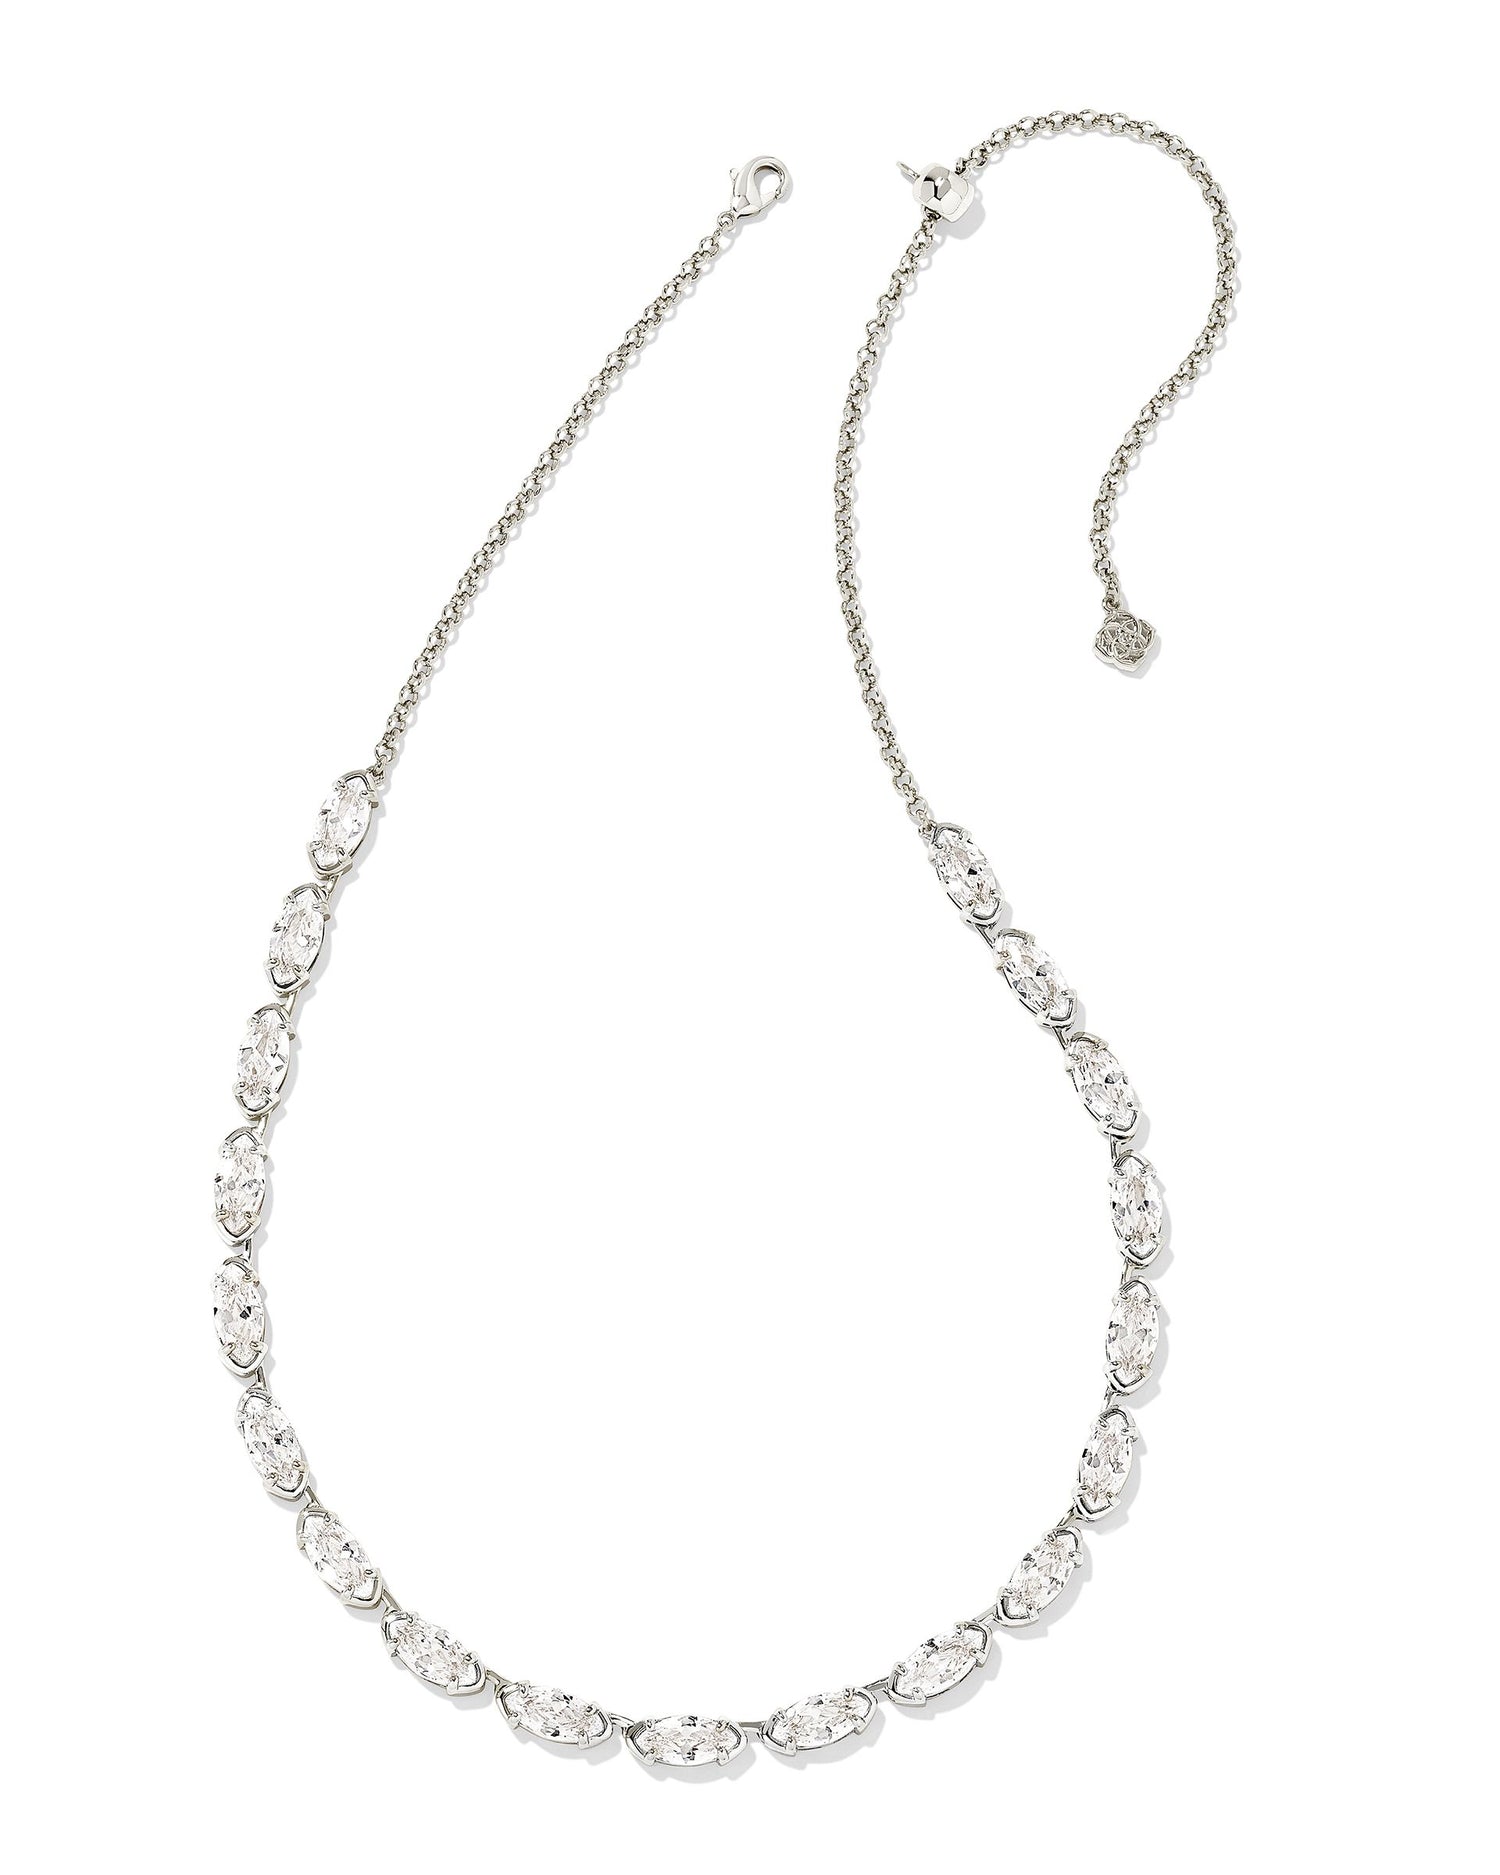 Hello, sparkly stunner! Featuring a bold chain studded with crystals, the Genevieve Strand Necklace in White Crystal adds that “wow” factor to your outfit, making it perfect for every standout occasion.  Dimensions-16' CHAIN WITH 3' EXTENDER,0.15'W Metal- 14K Gold plated over brass(Gold), Rhodium Over Brass (Silver) Closure- Lobster clasp w/ single adjustable slider bead Material- White CZ This one is silver